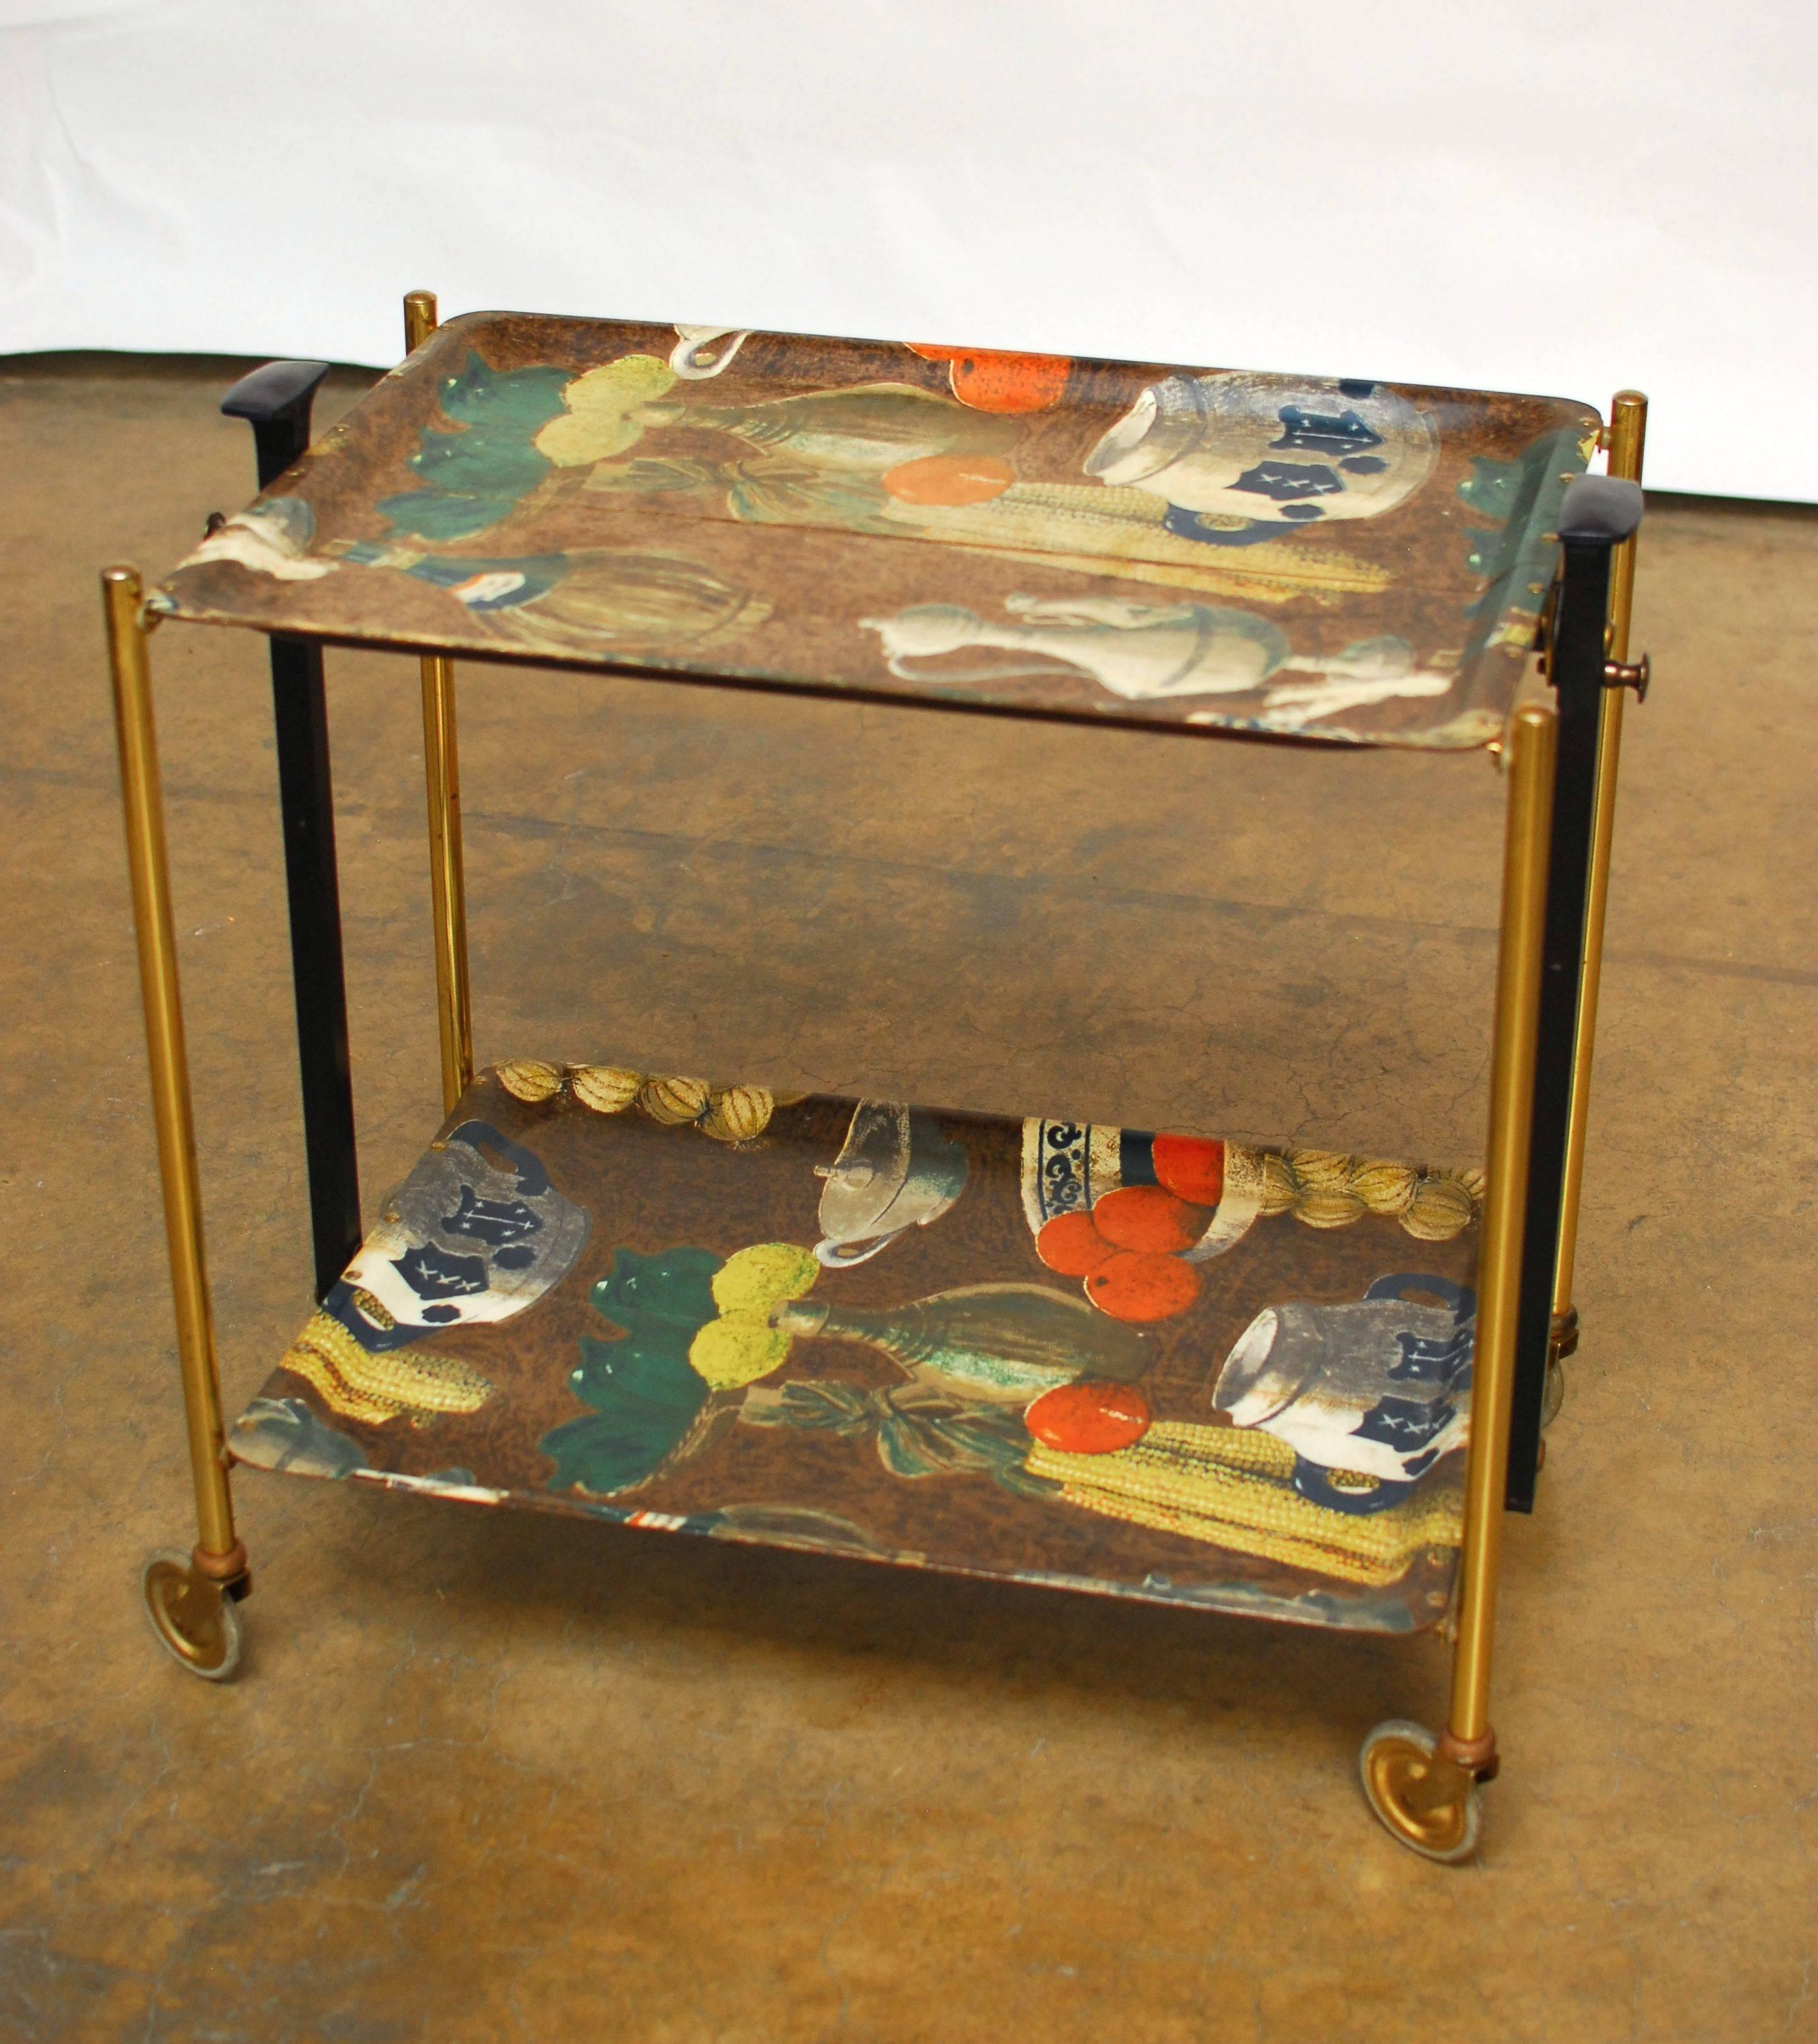 Unique, mid-century modern folding tea cart designed by Gerlinol with formica shelves and a metal frame that collapses for storage. Made in Germany by Bremshey in the 1950's. Rare style with European culinary artwork on the top panels. Rolls on its